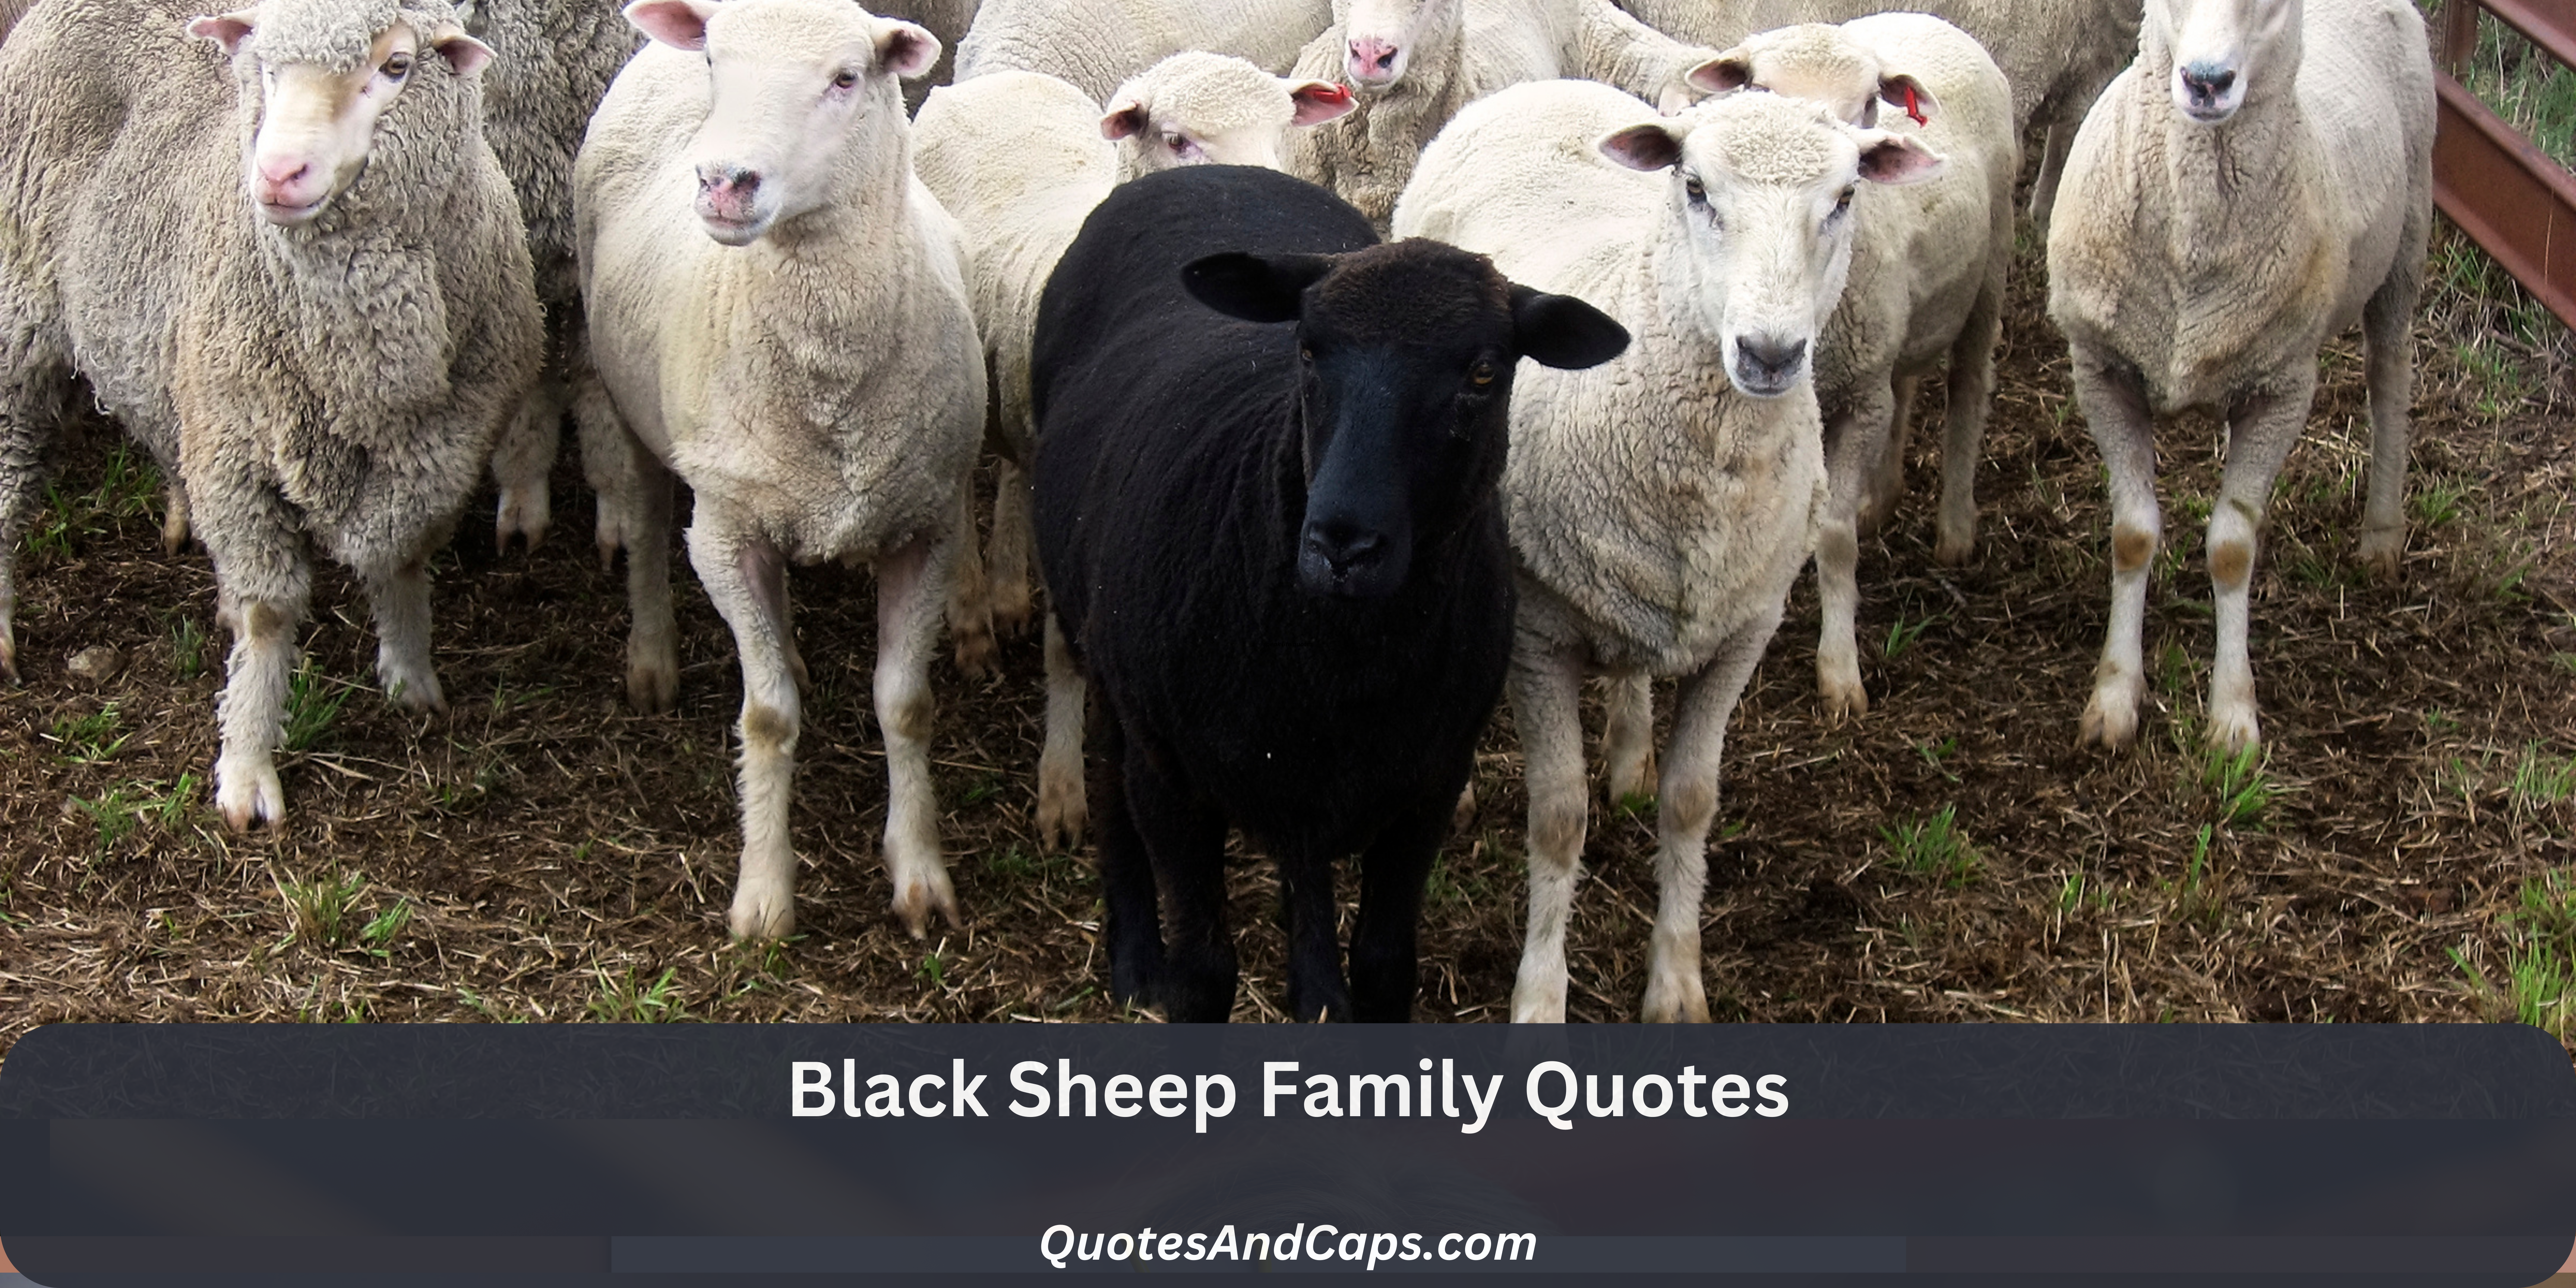 Black Sheep Family Quotes